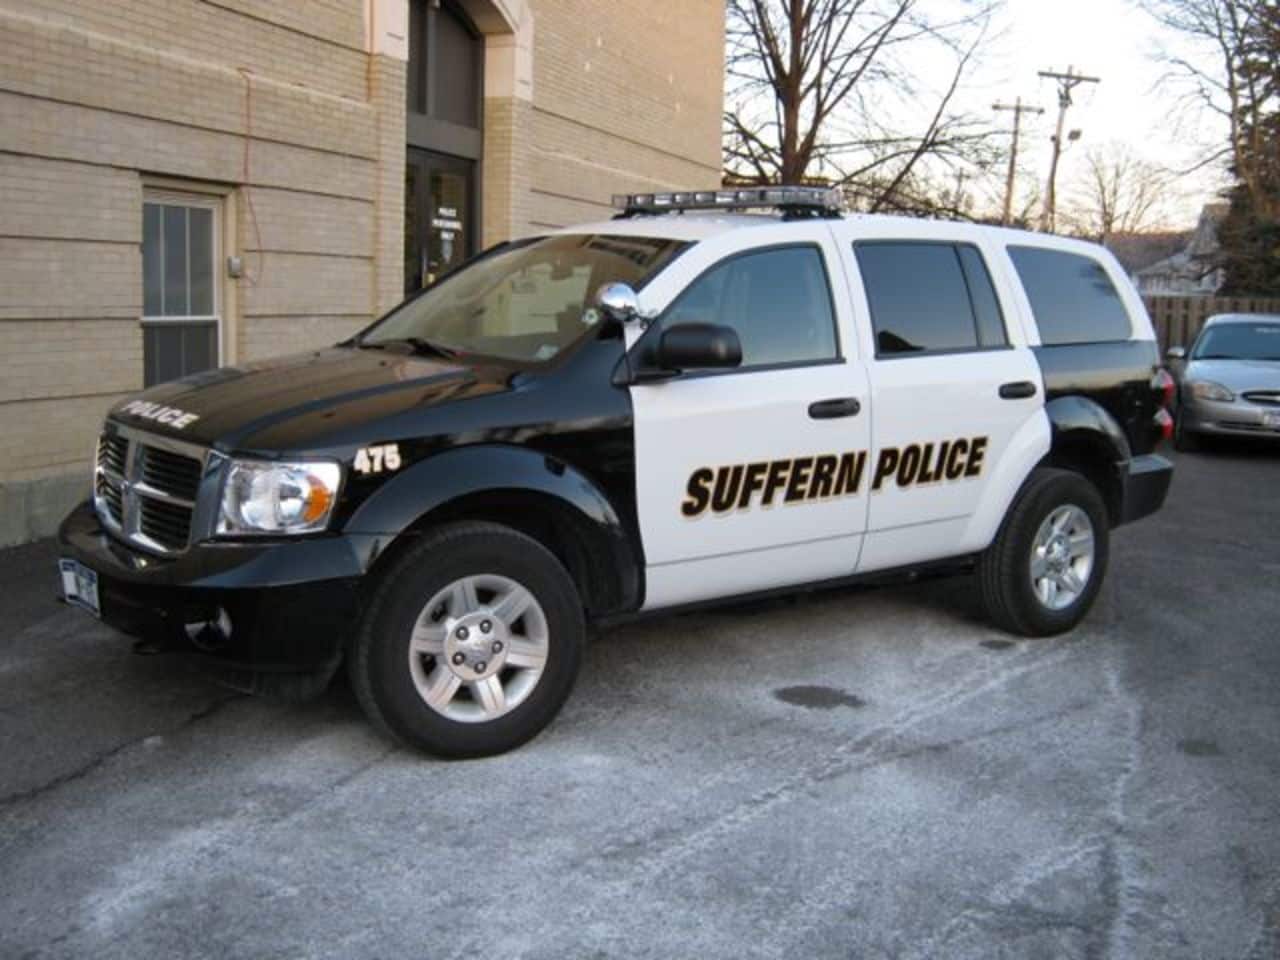 Suffern police are urging people not to accept rides from strangers, or even people they don't know well, after an incident at a rest stop on the state Thruway in Sloatsburg.